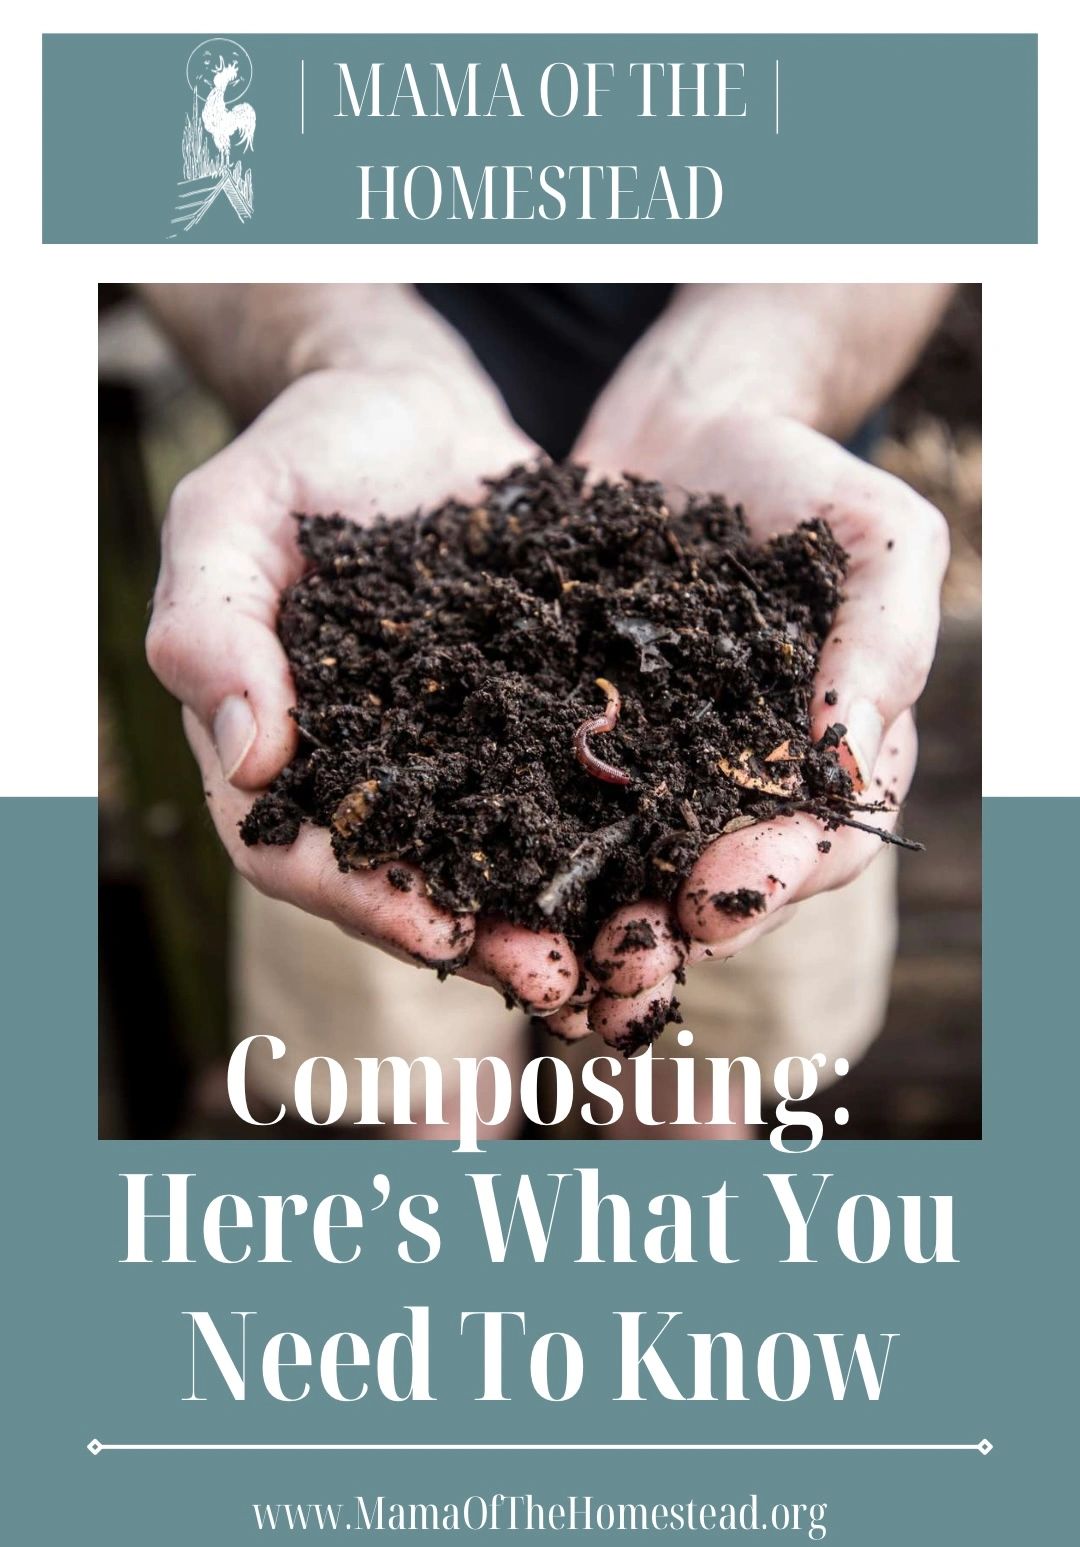 How To Compost Dryer Lint - Is Dryer Lint Beneficial To Compost